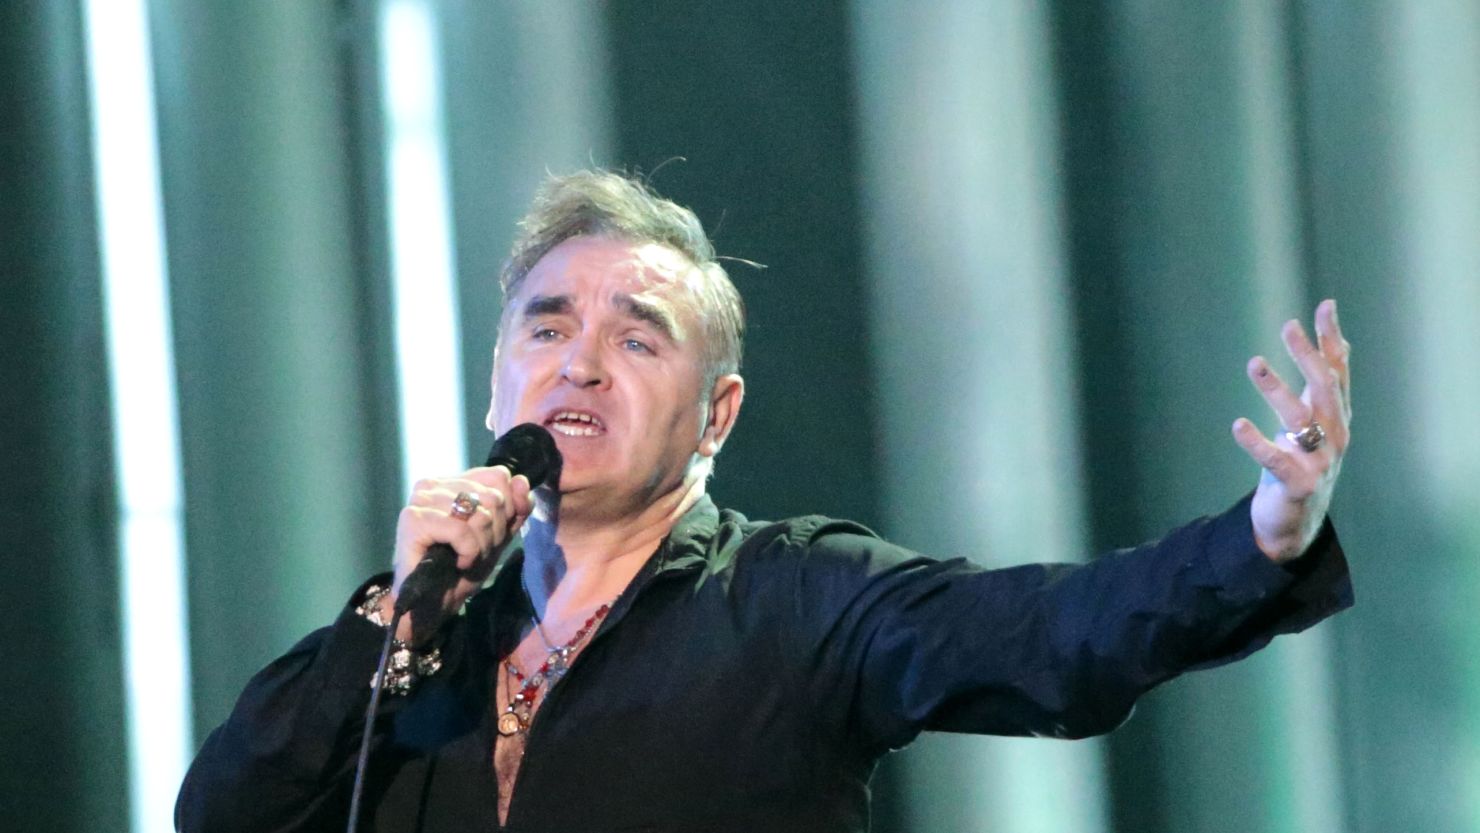 A small party focused on animal rights and health and environmental issues has approached English singer Morrissey to enter the upcoming London mayoral race